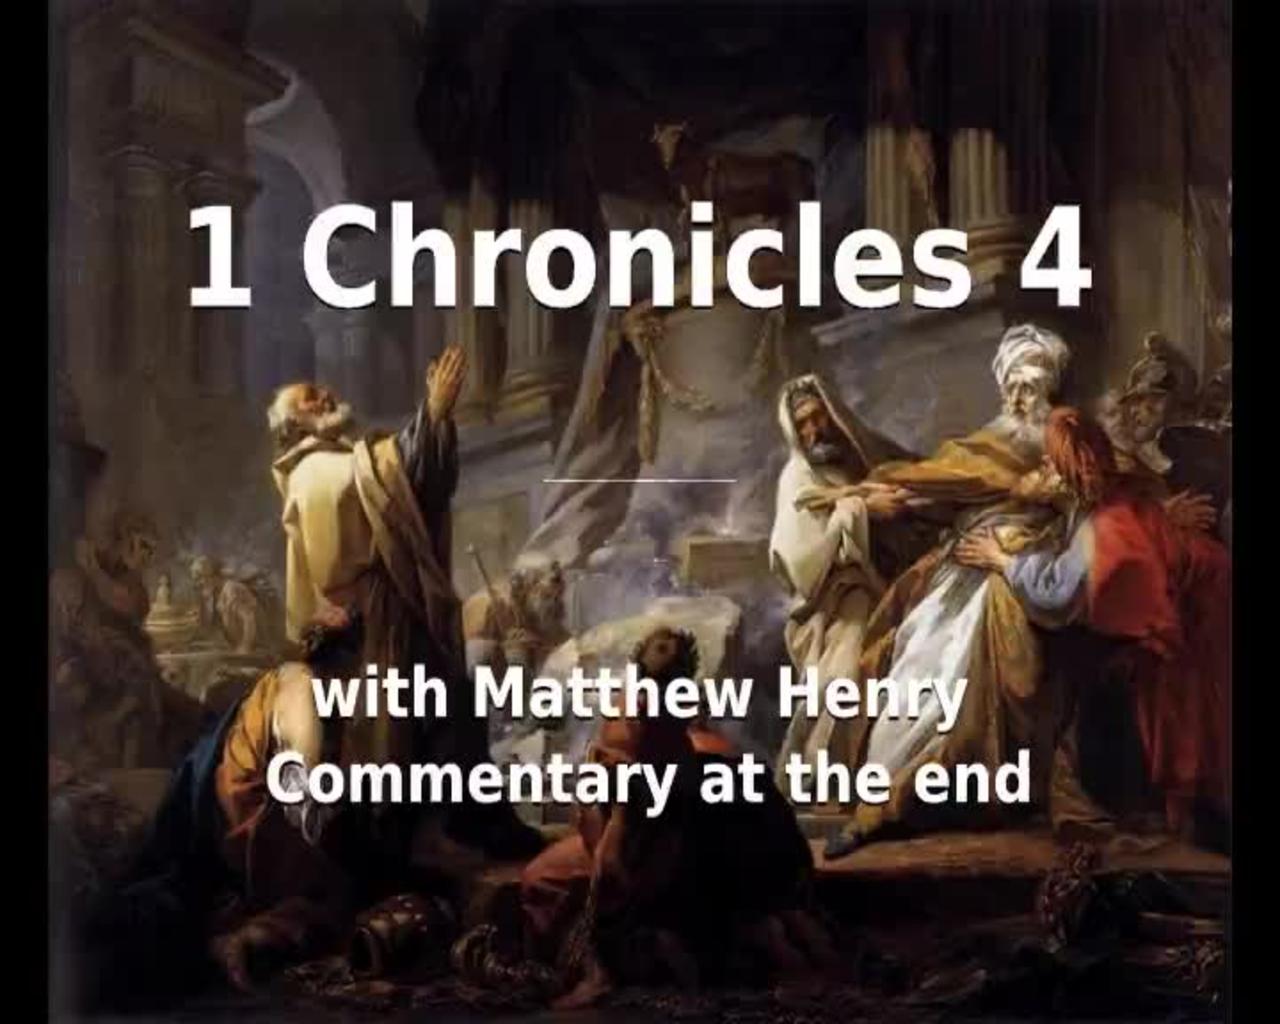 📖🕯 Holy Bible - 1 Chronicles 4 with Matthew Henry Commentary at the end.